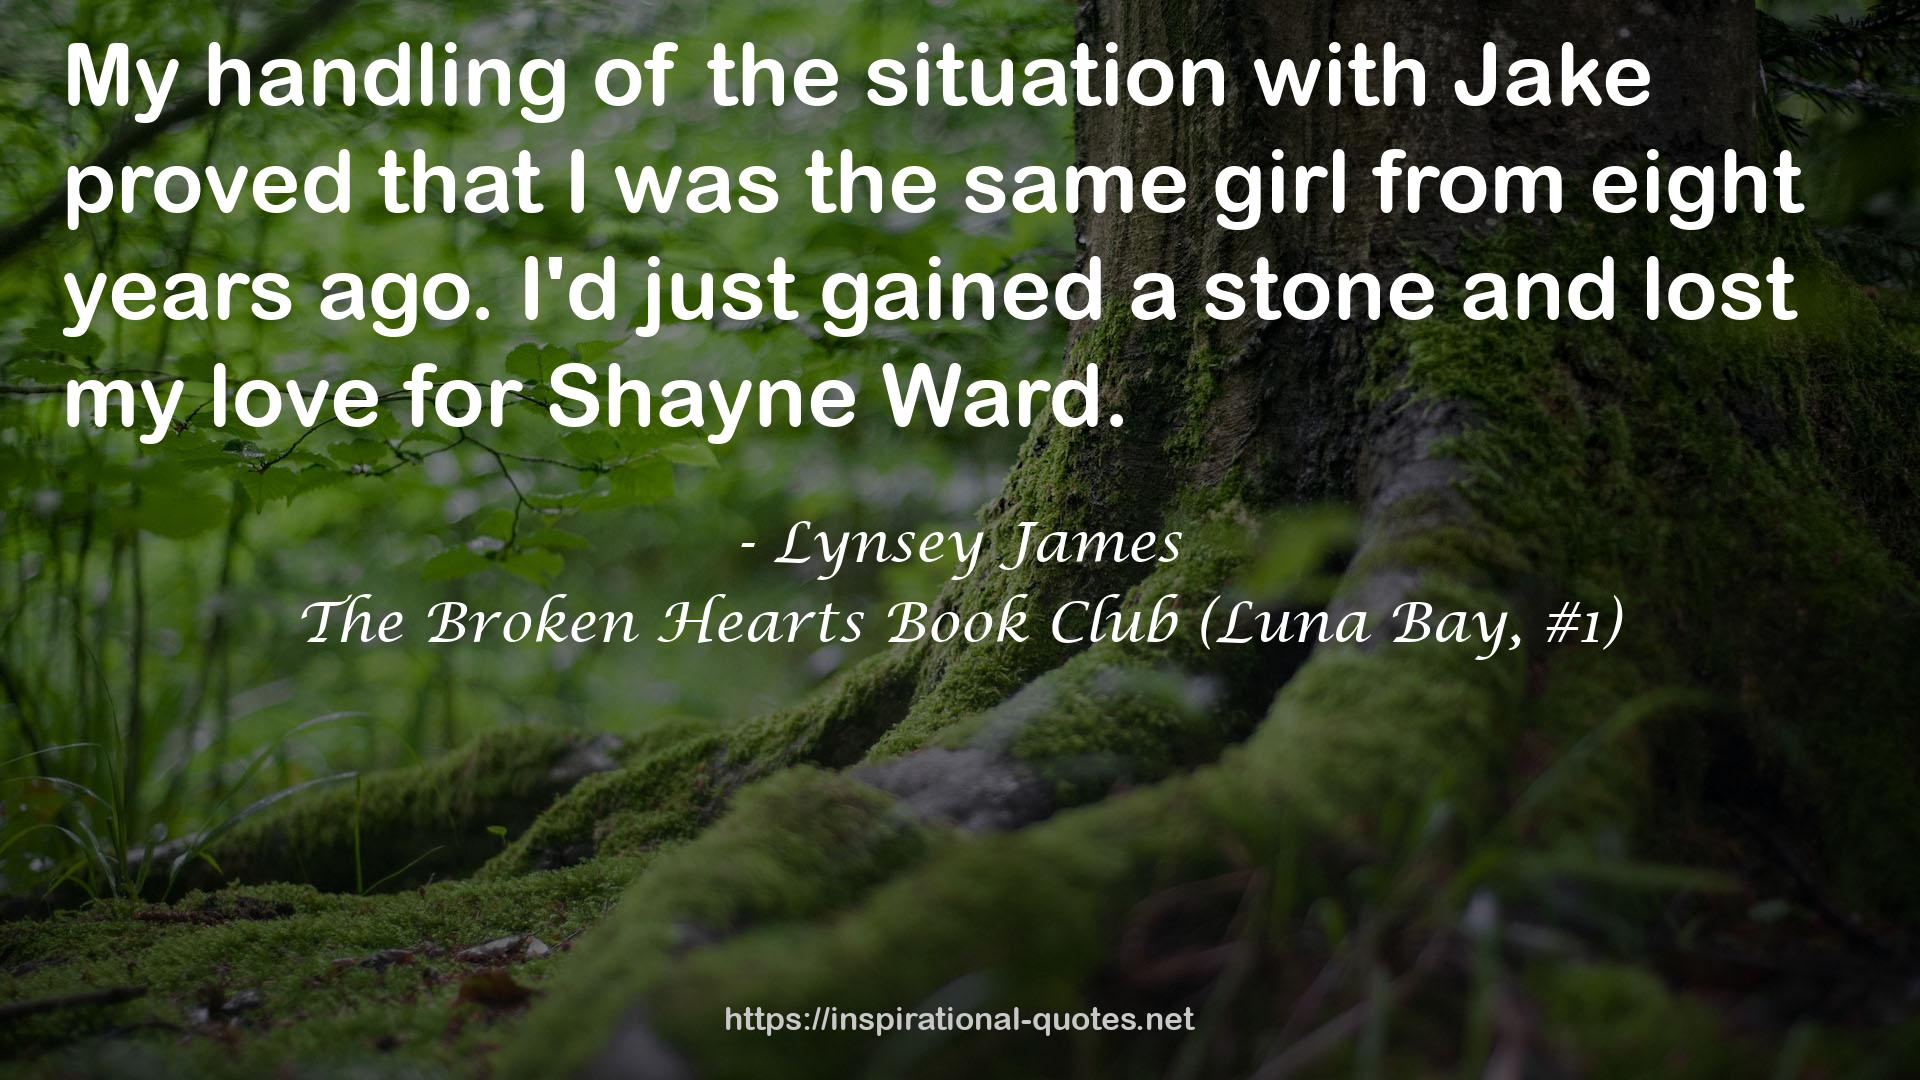 Lynsey James QUOTES